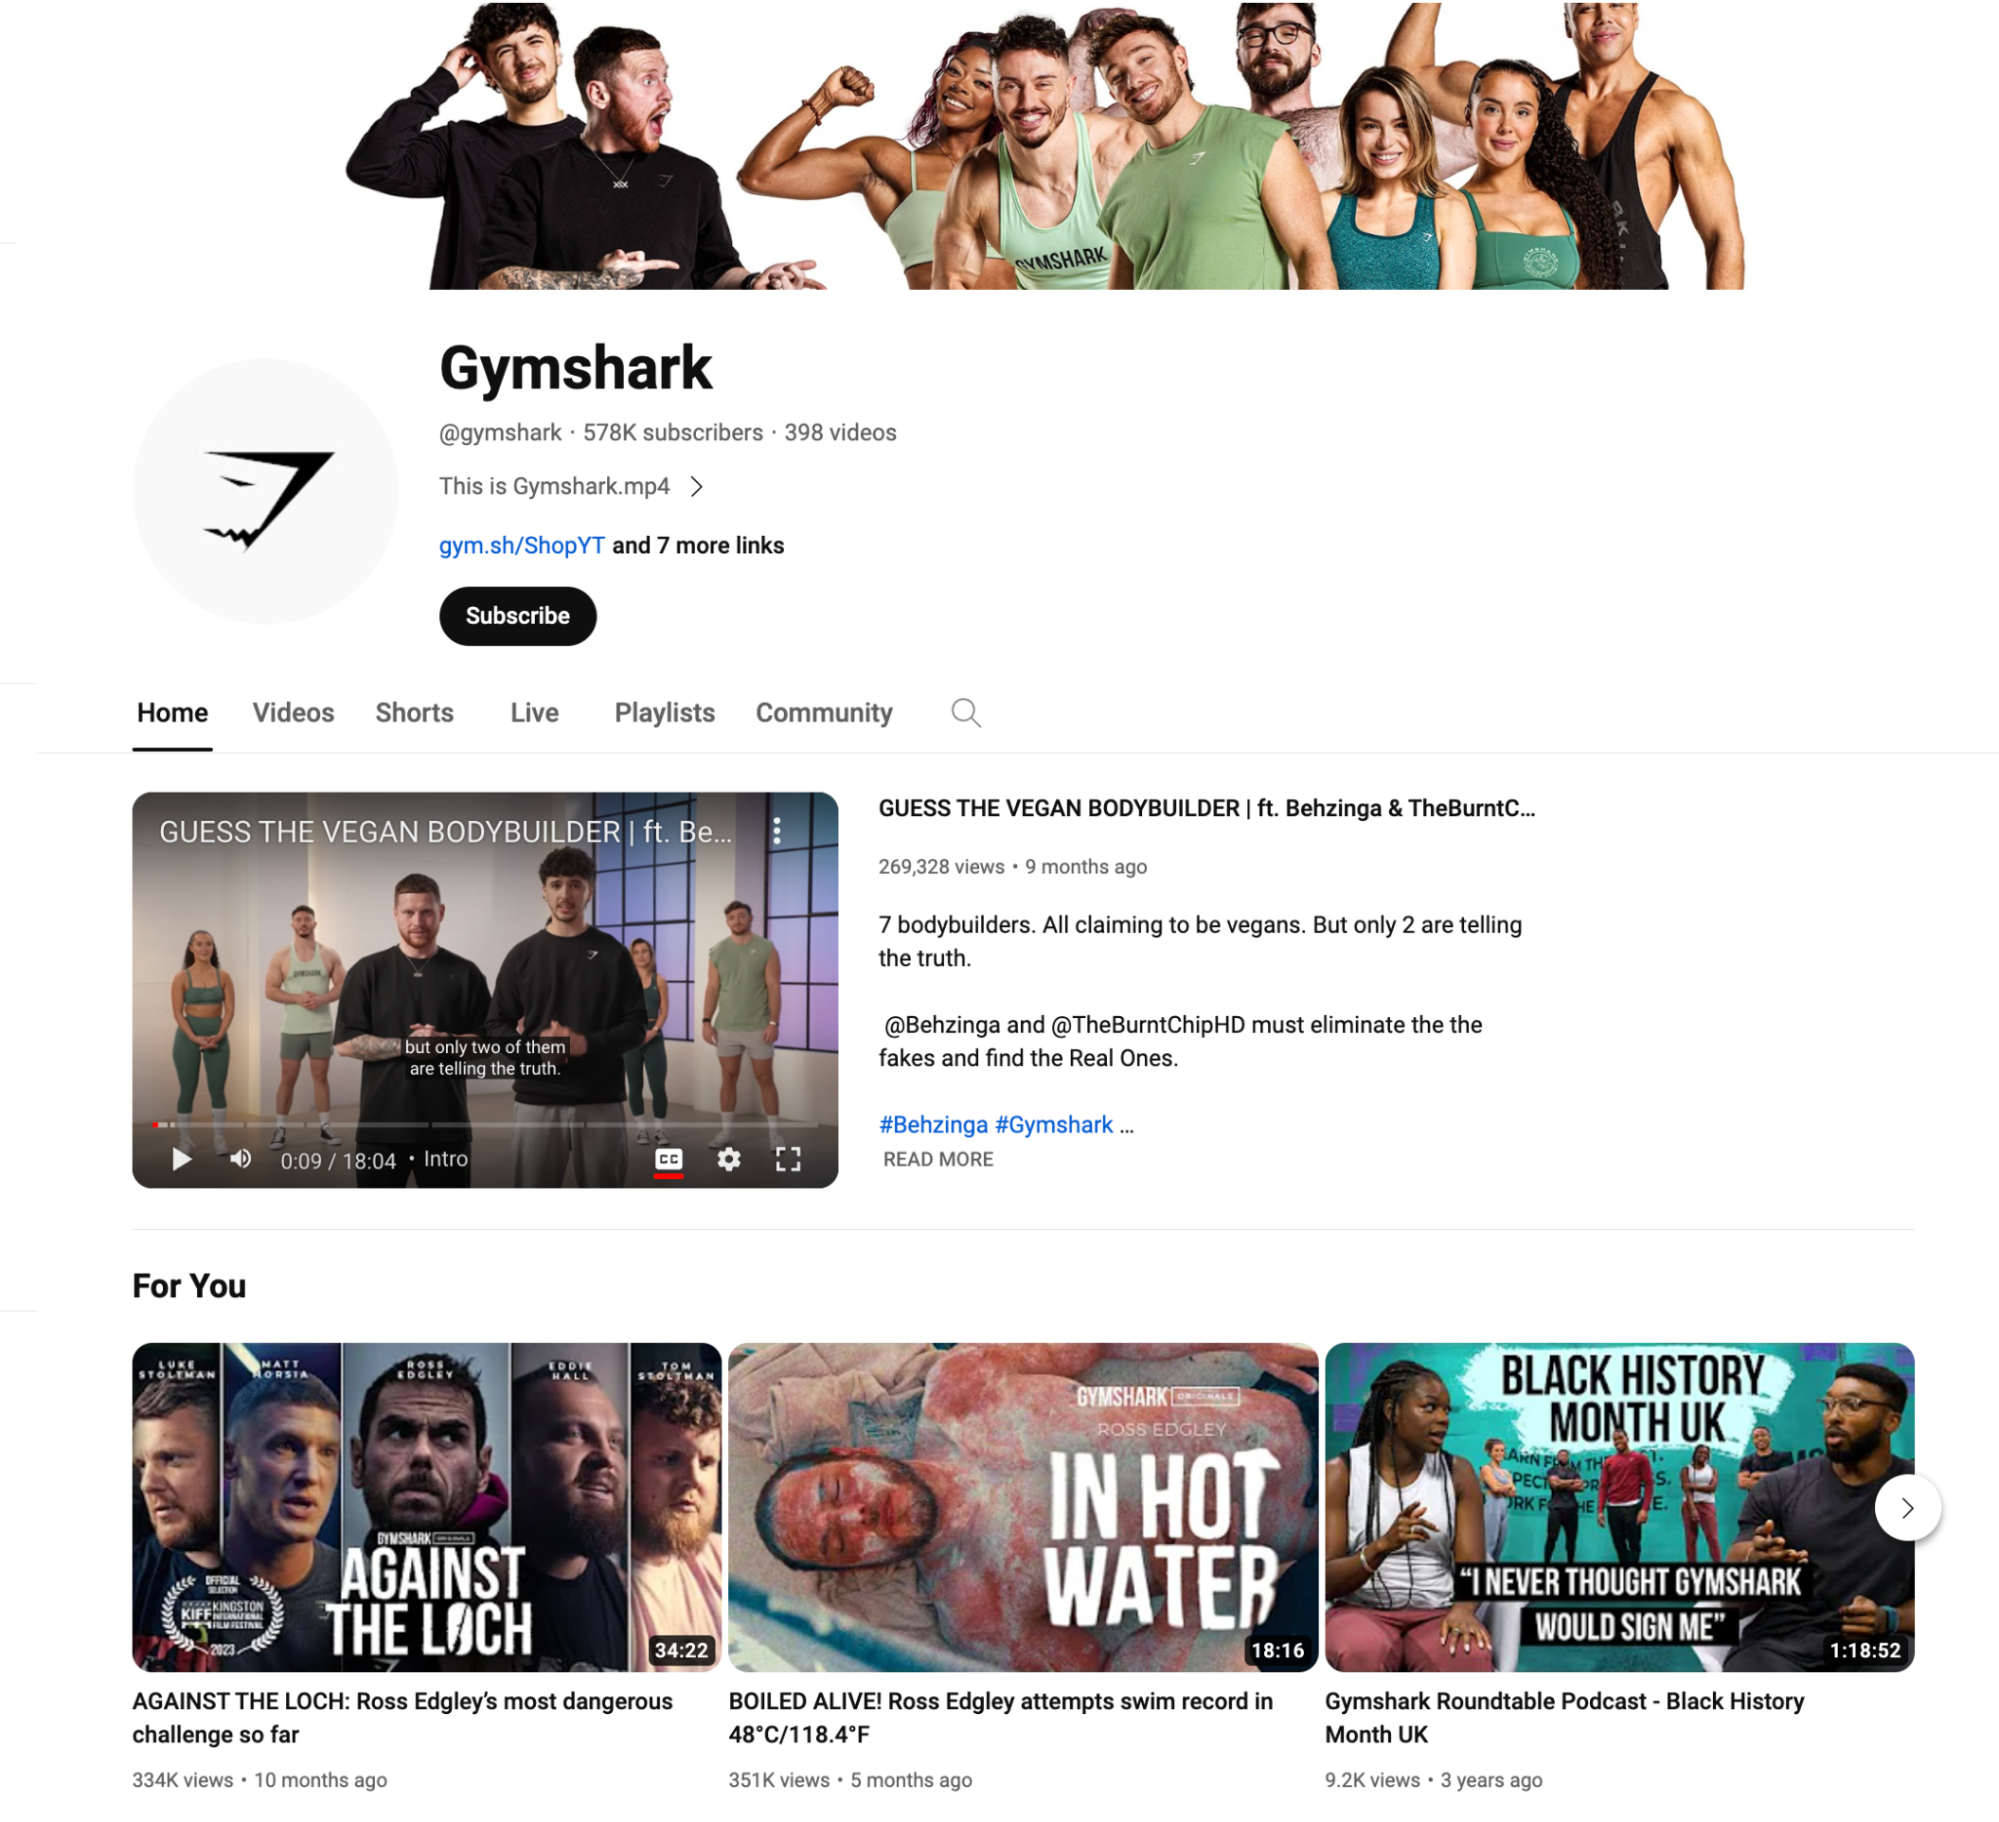 Screenshot of Gymshark’s YouTube channel page